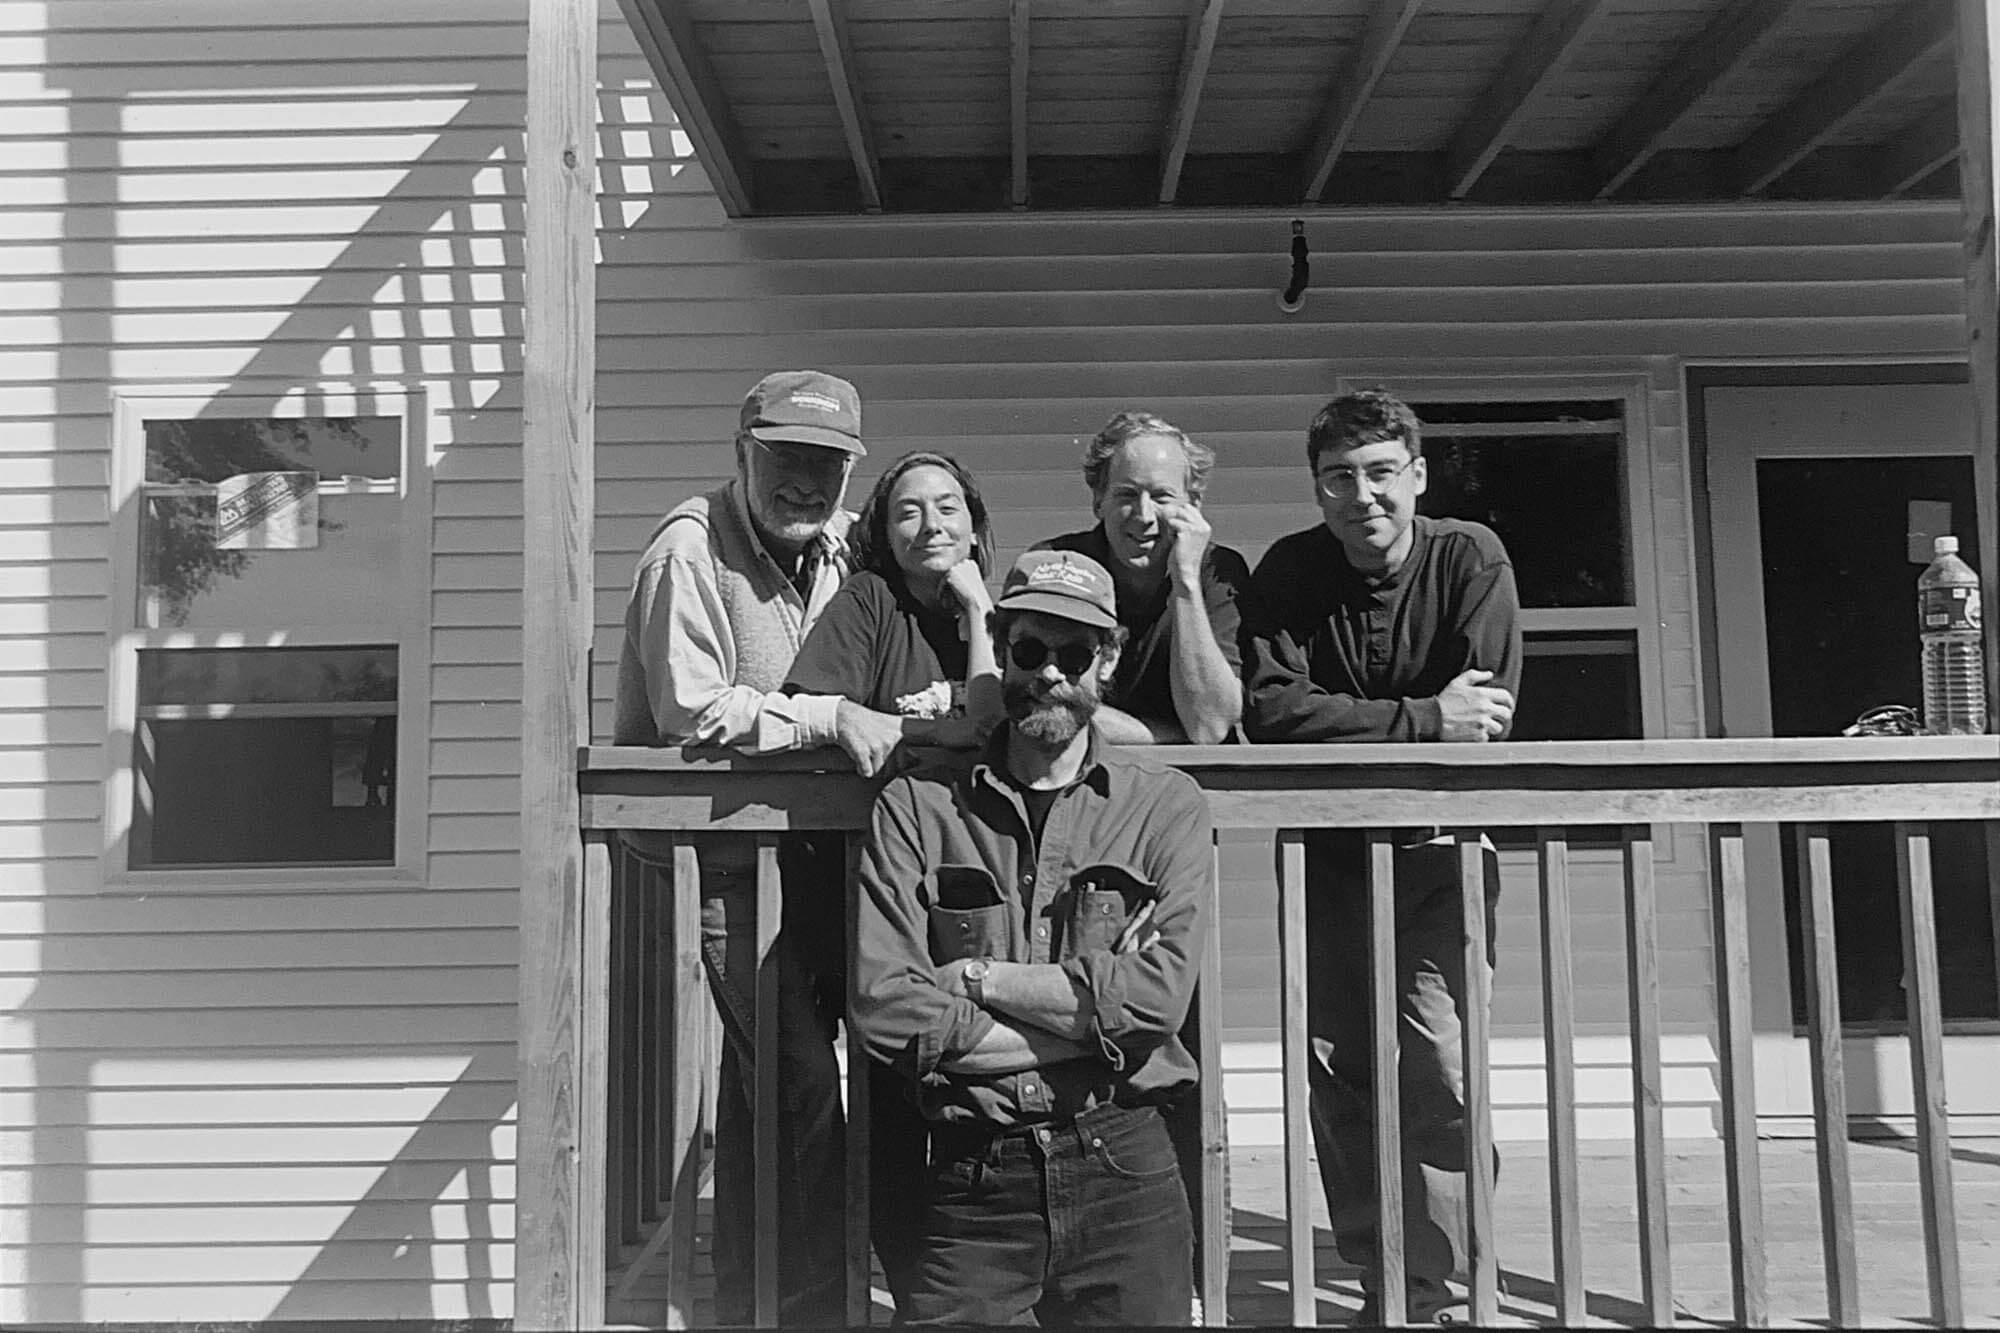 David Lyman with the Resident Photography faculty Ann Jastrab, Fred Schrieber, Brenton Hamilton and teaching Assistant Mark Kurtz on the deck of the newly constructed New Imaging Center (NIC Building).